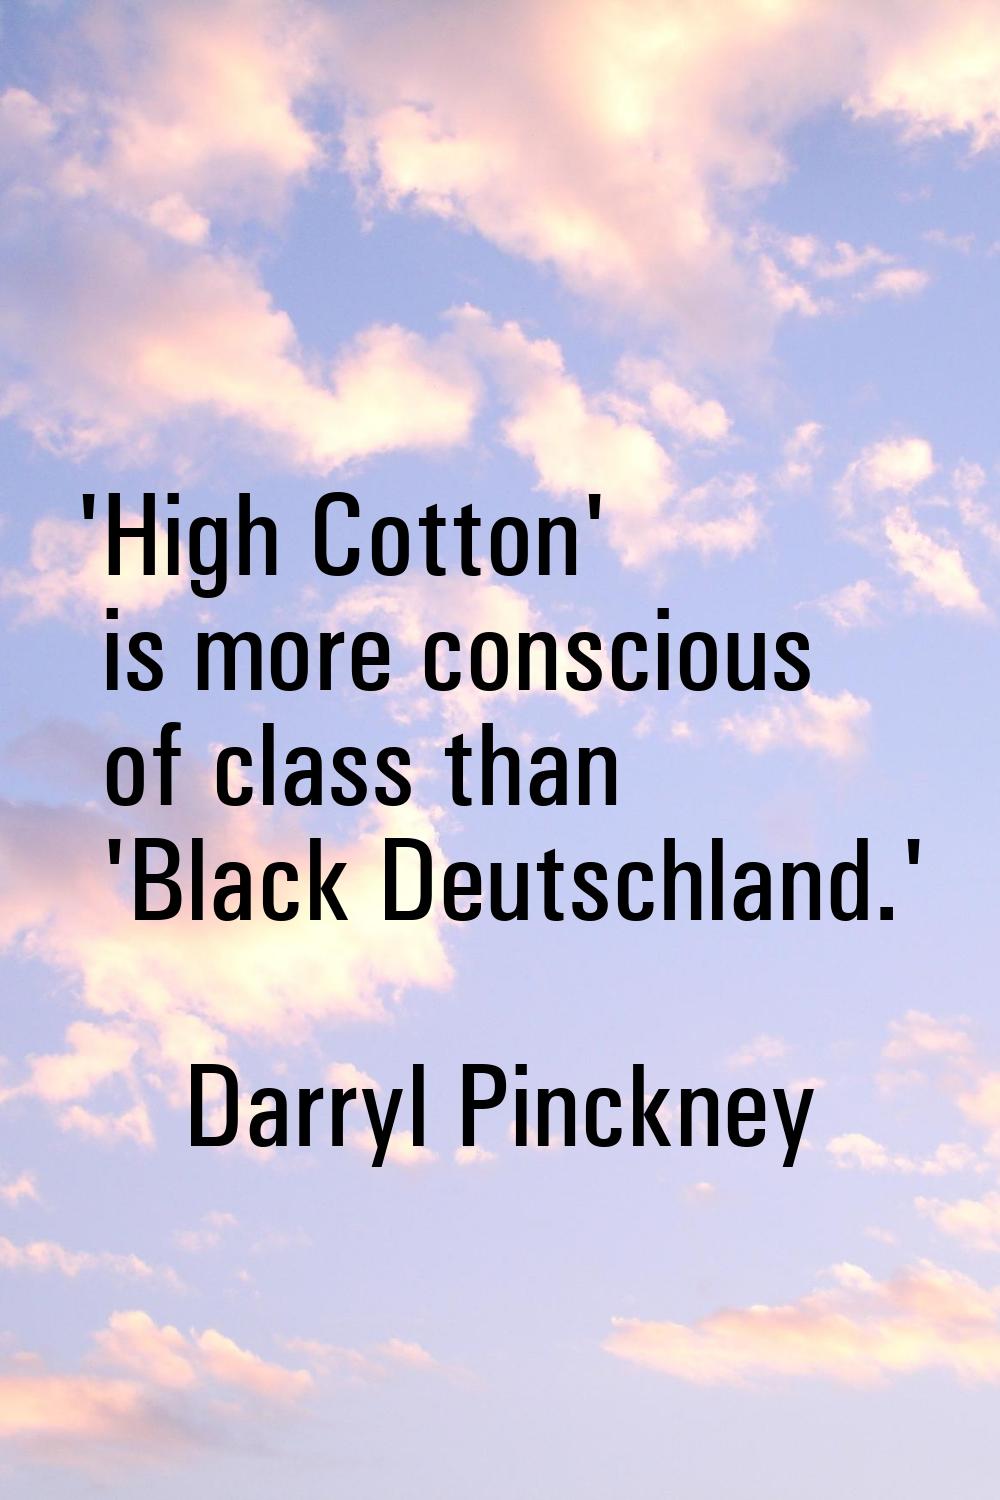 'High Cotton' is more conscious of class than 'Black Deutschland.'